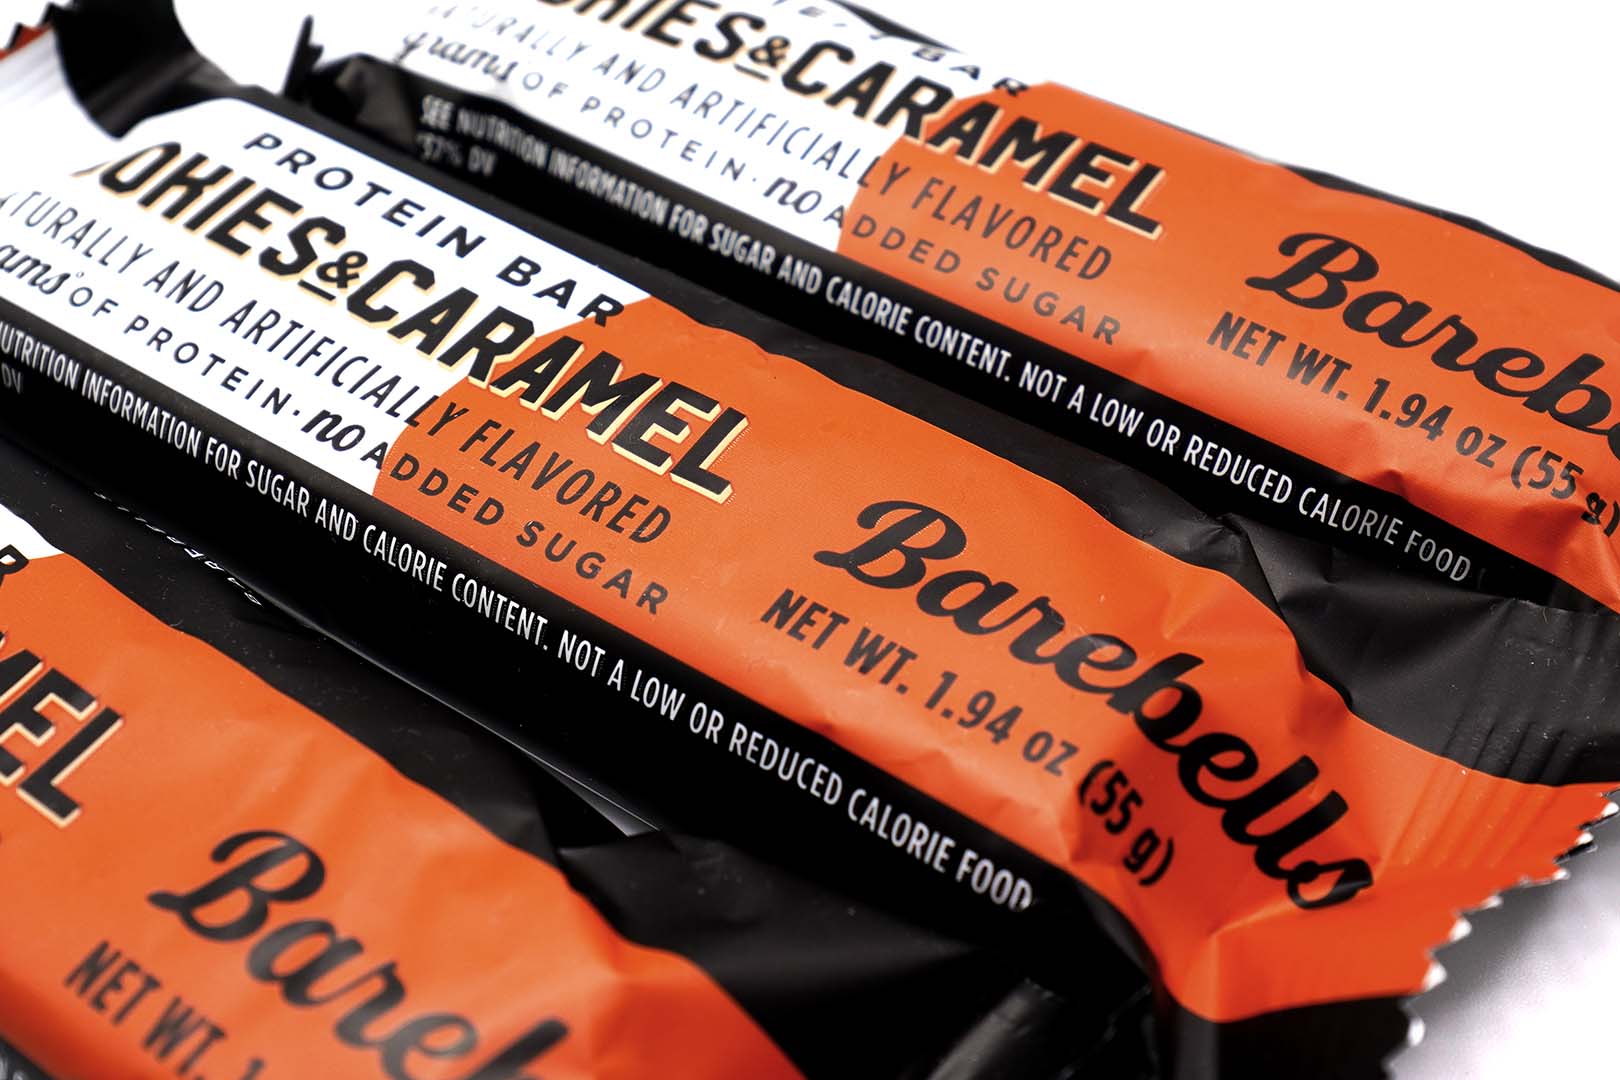 Barebells Cookies And Caramel Review